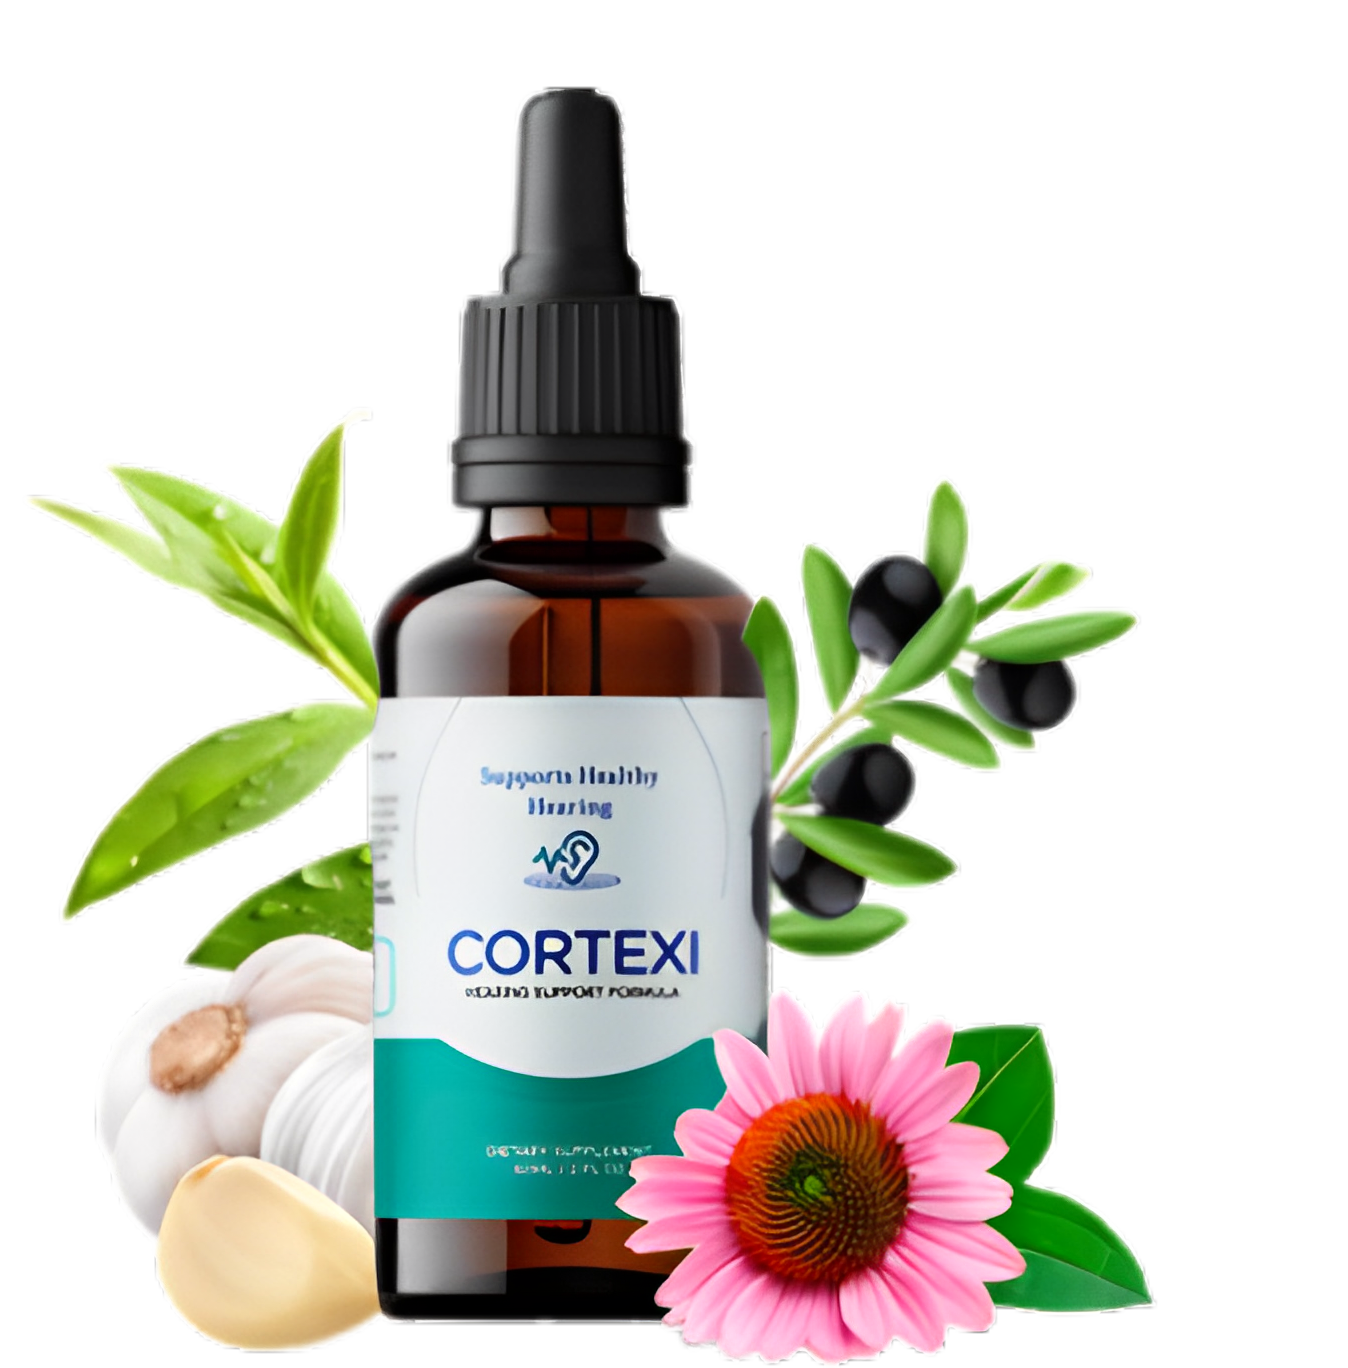 Boost your auditory health with Cortexi - natural formula